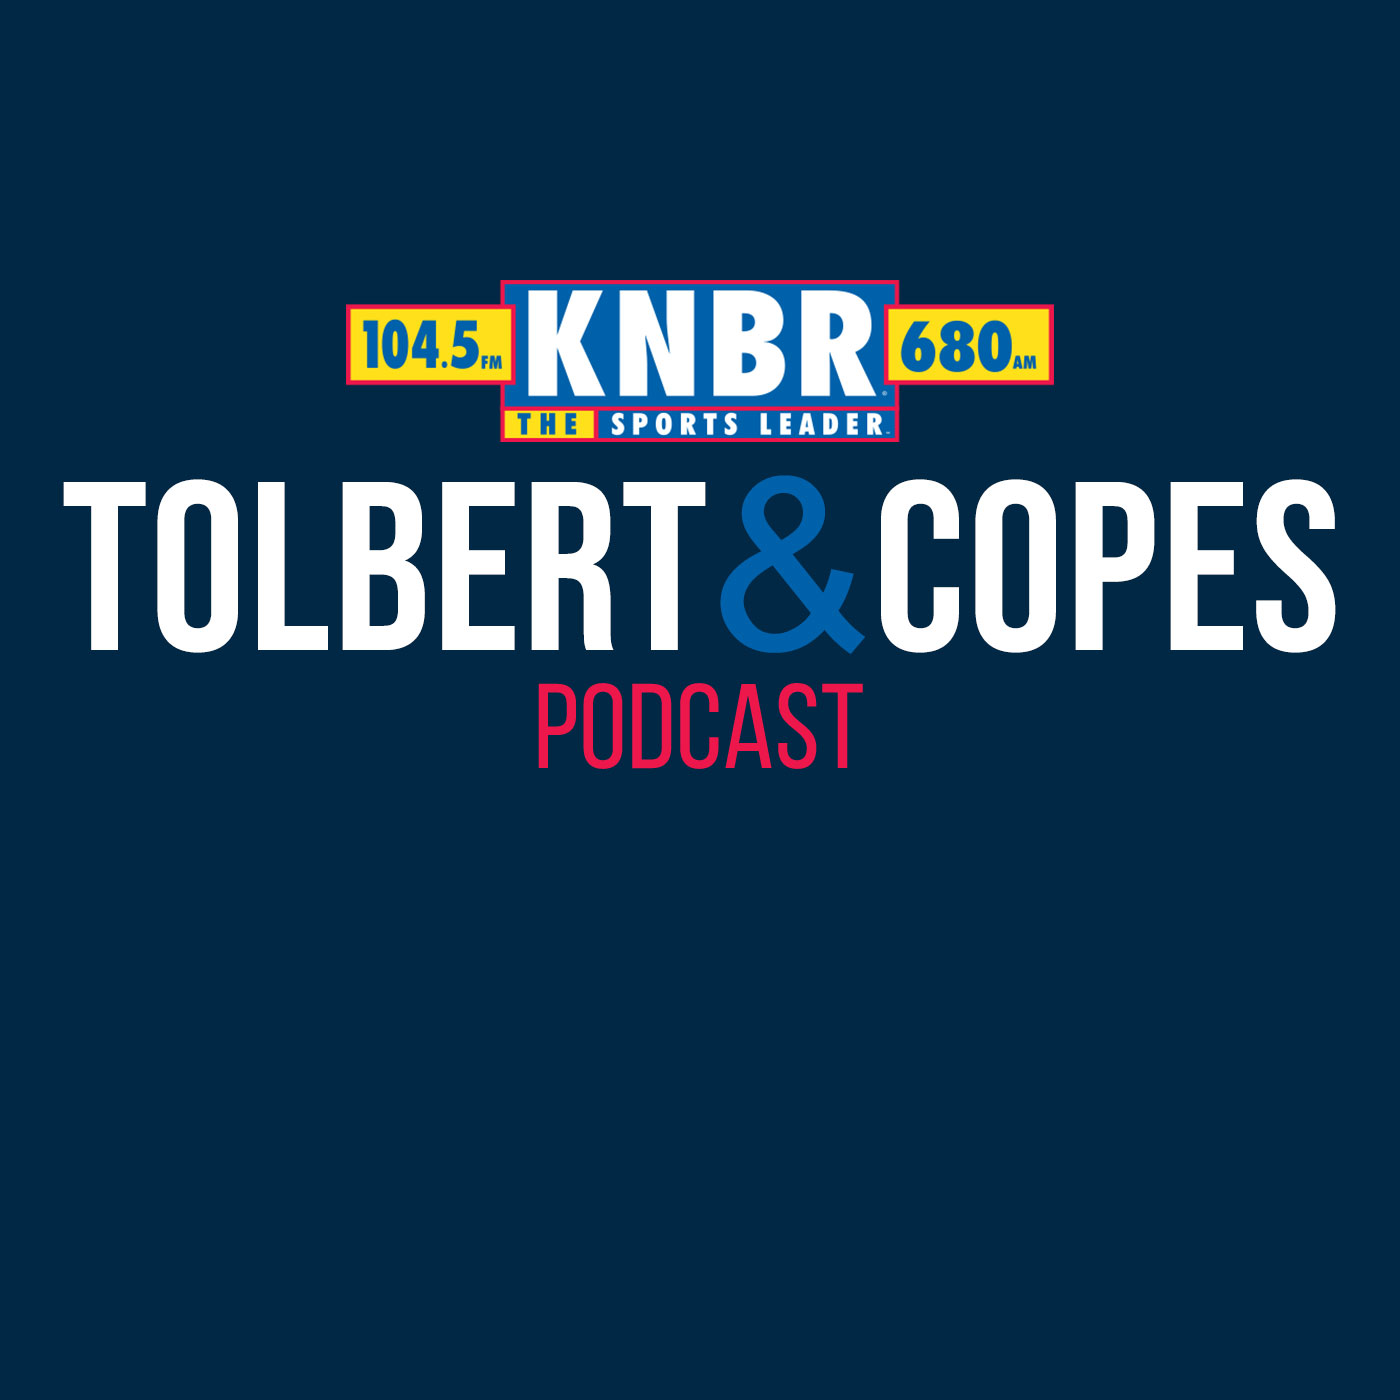 4-7 Marc Spears joins Tolbert & Copes to discuss the NBA Playoffs as the field starts to take shape and discuss who are the contenders and the pretenders